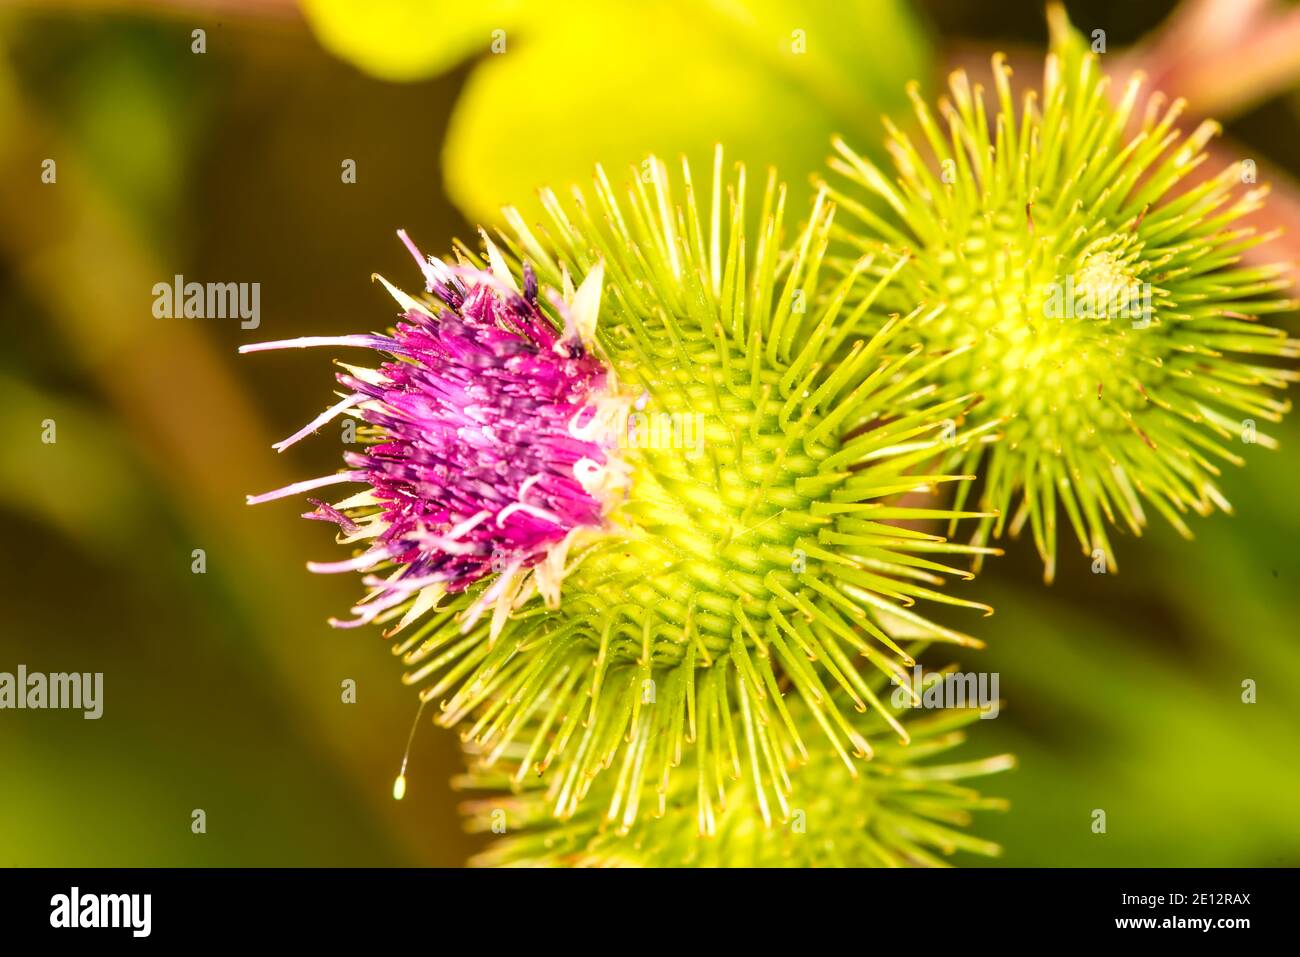 Medicinal Herb Greater Burdock With Flower Stock Photo